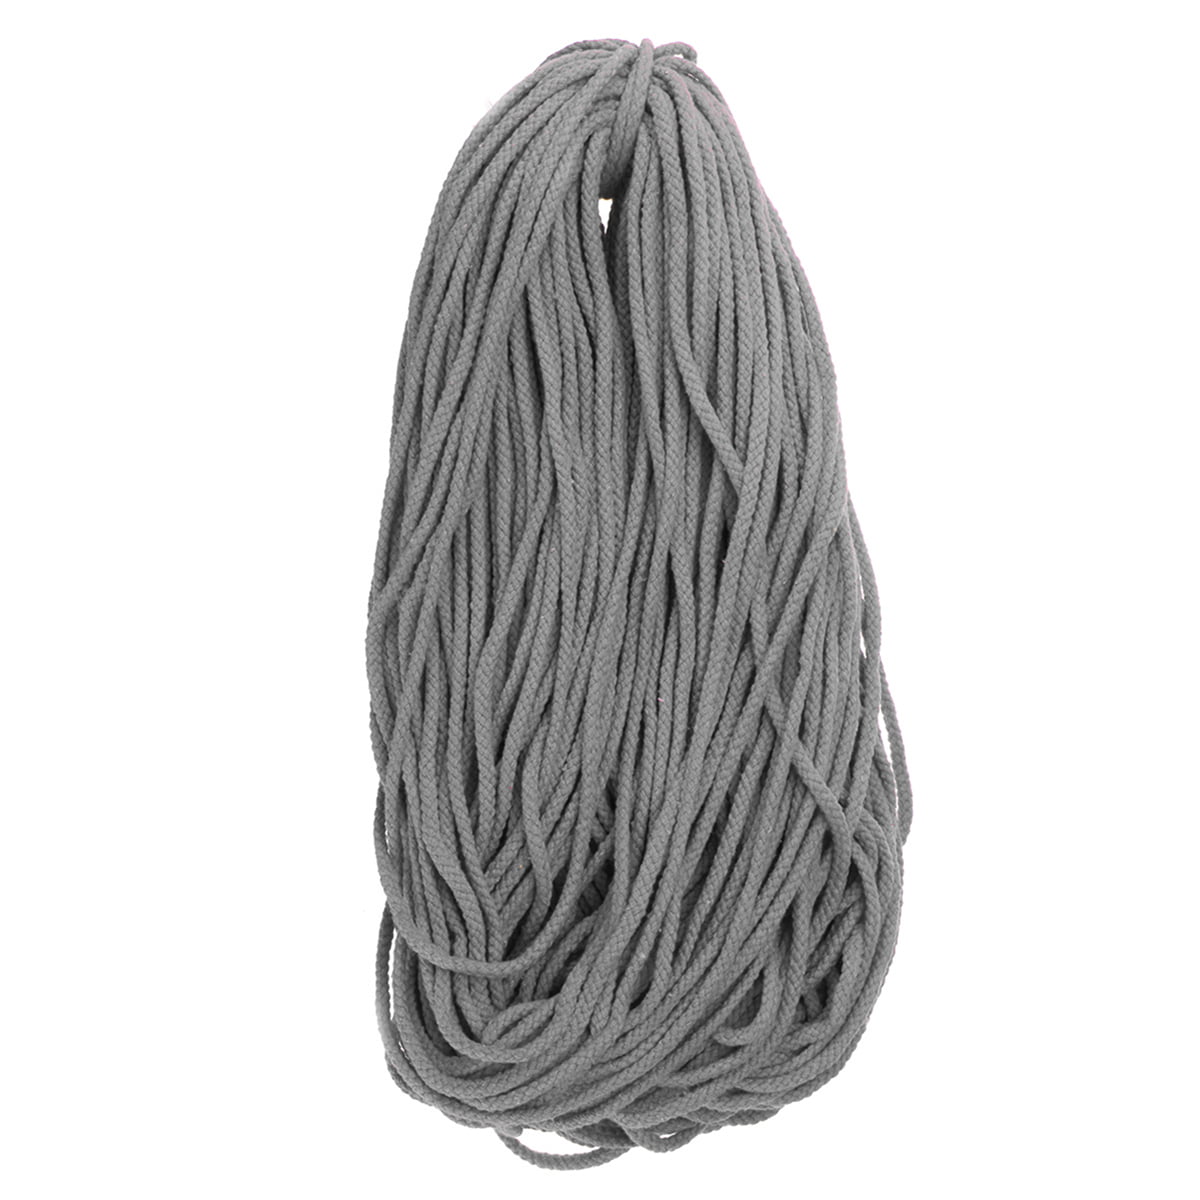 how to make a twisted cord out of wool